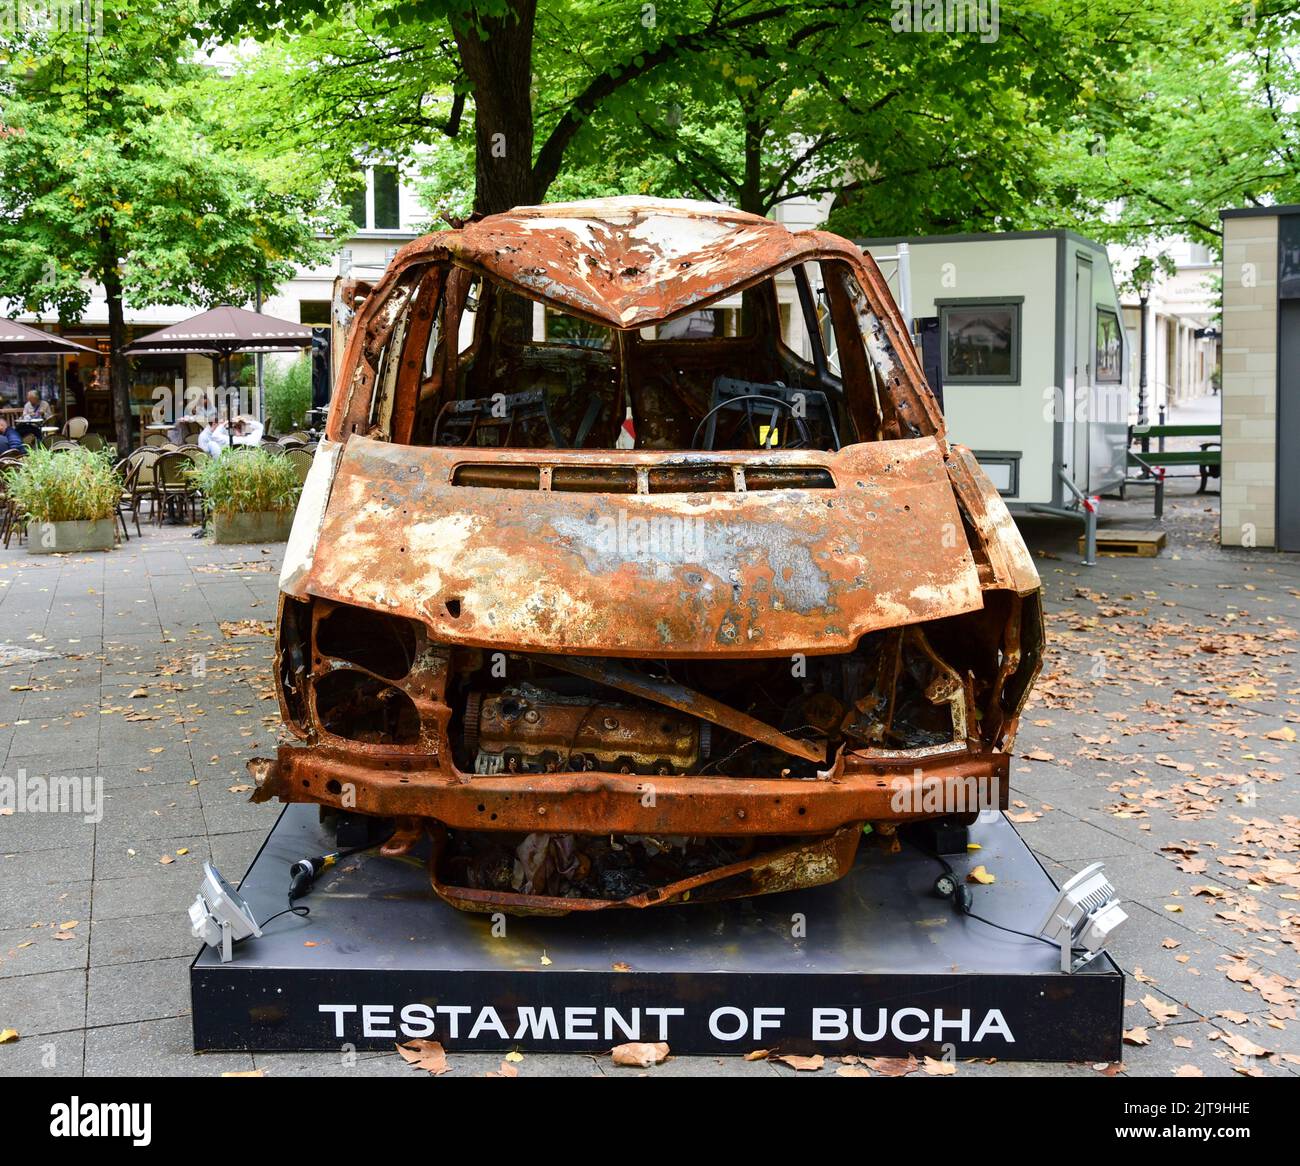 Vehicle in which three Ukrainian women and a 14-year-girl were killed in Bucha, Ukraine, on display in Berlin for the 'Testament of Bucha' project Stock Photo